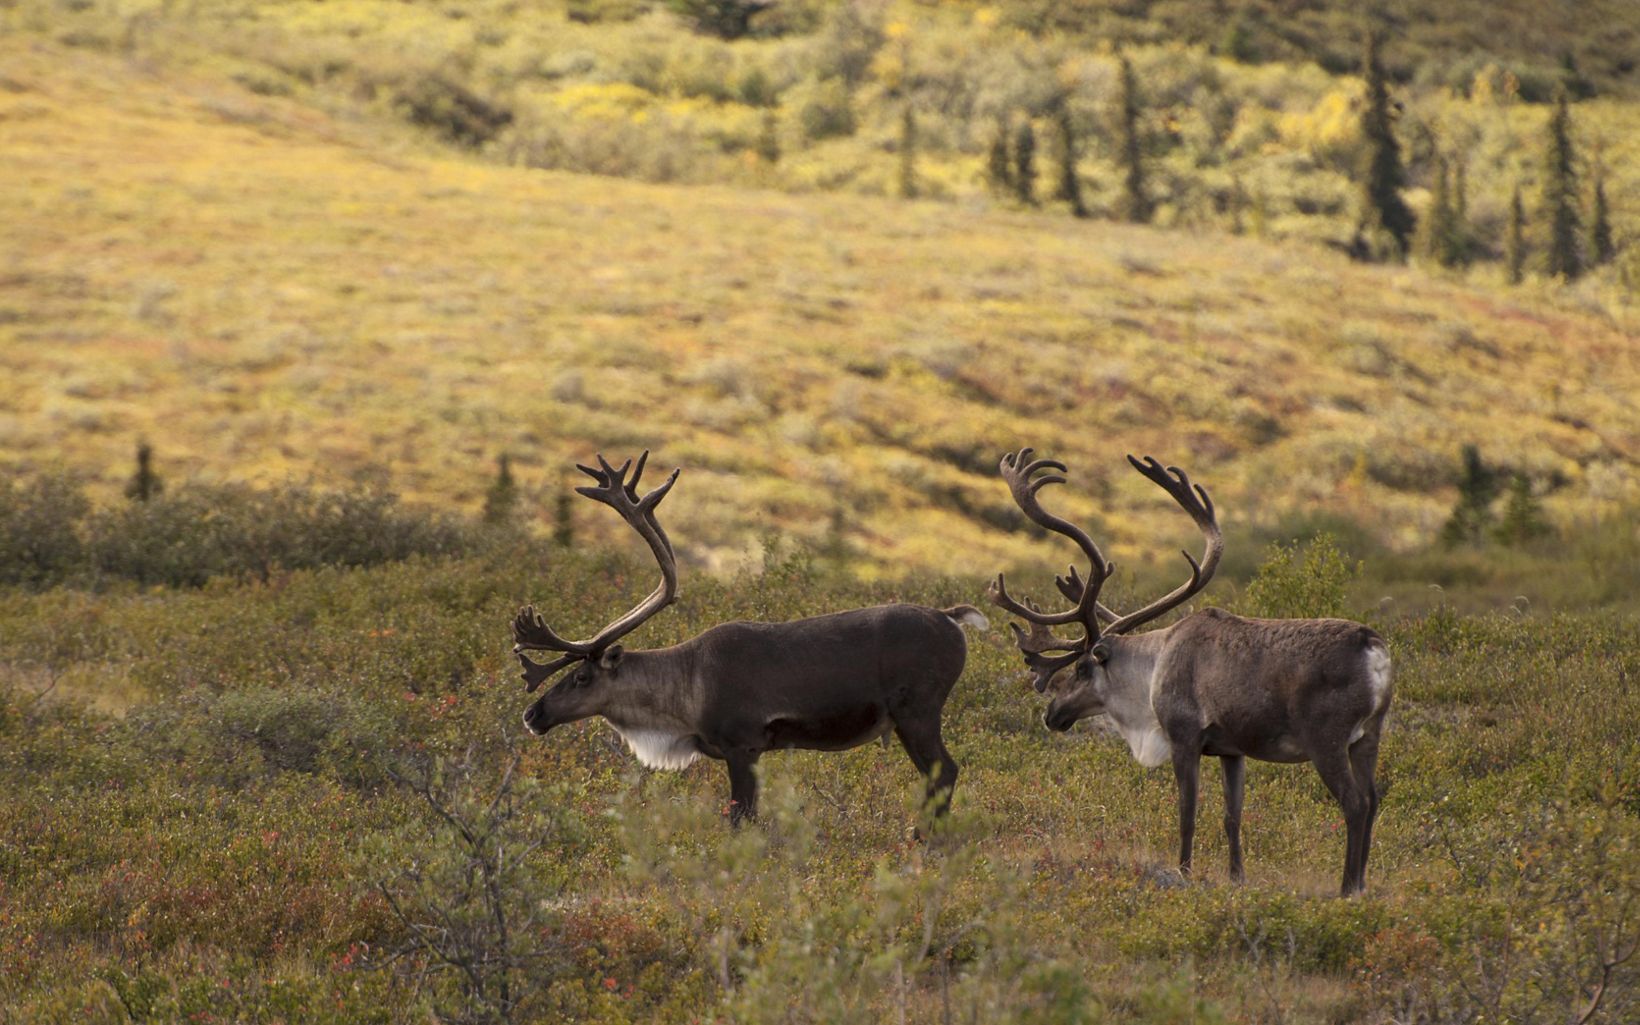 Manitoba is home to the last of the best herds of woodland caribou in Canada, making conservation efforts here vital.